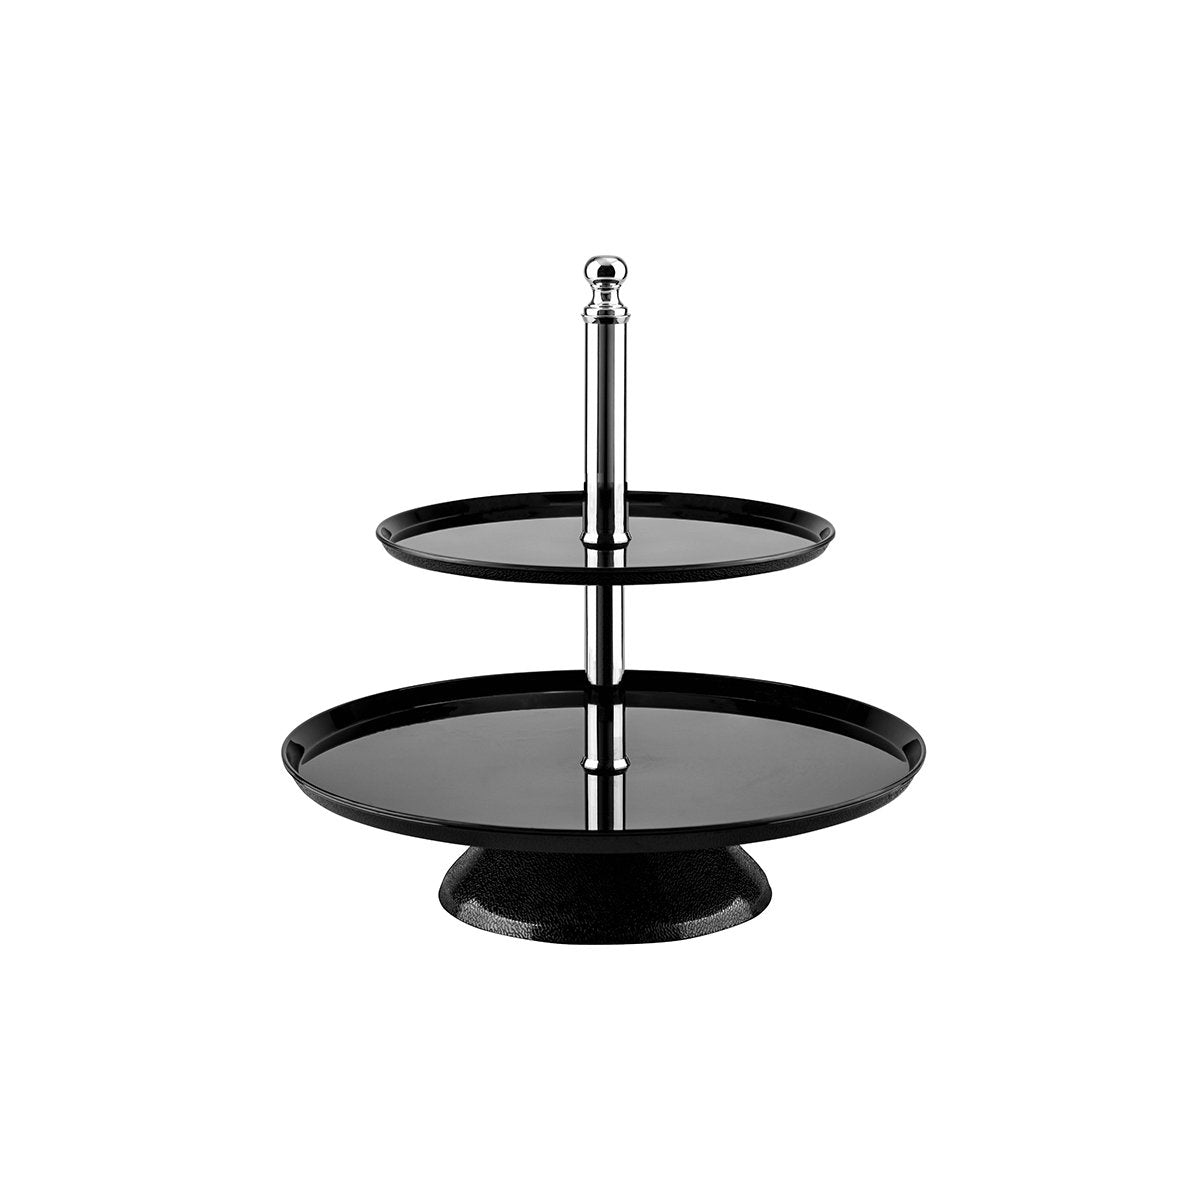 2 Tier Round Stand - 250/350mm, 370mm, Black, Polycarbonate